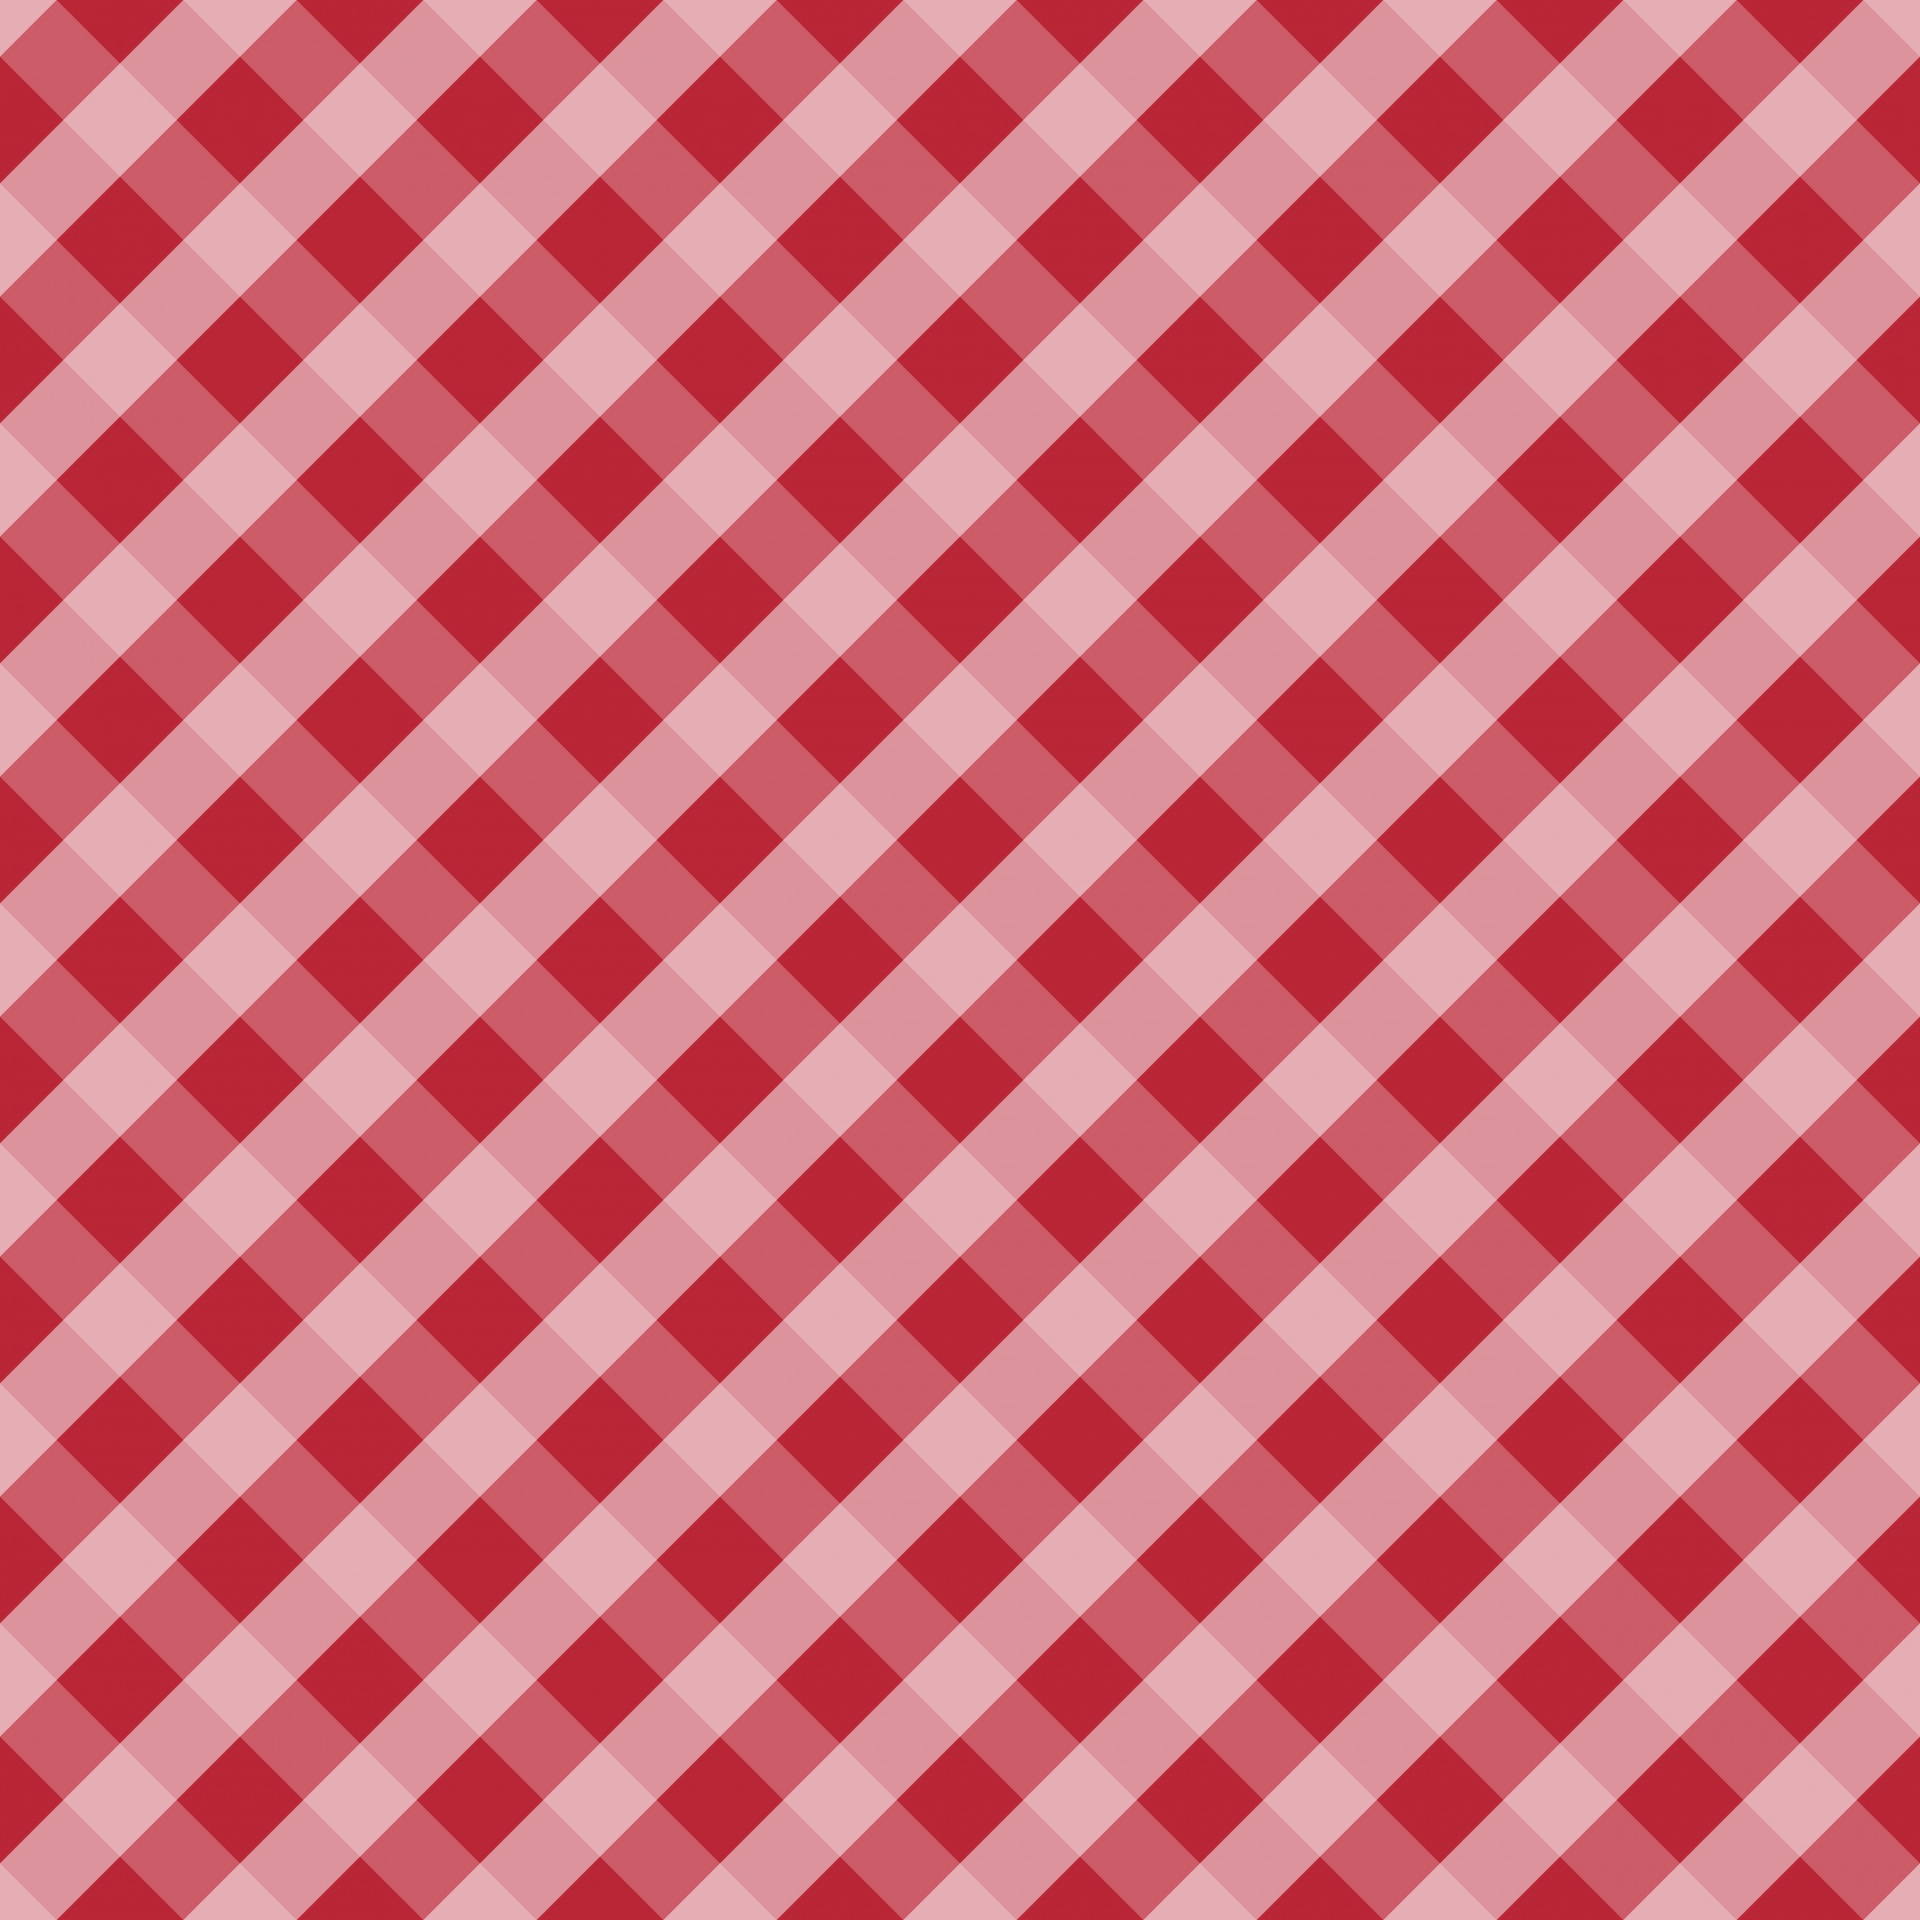 Gingham checks in red diagonal pattern ideal for Christmas background, gift wrap, etc